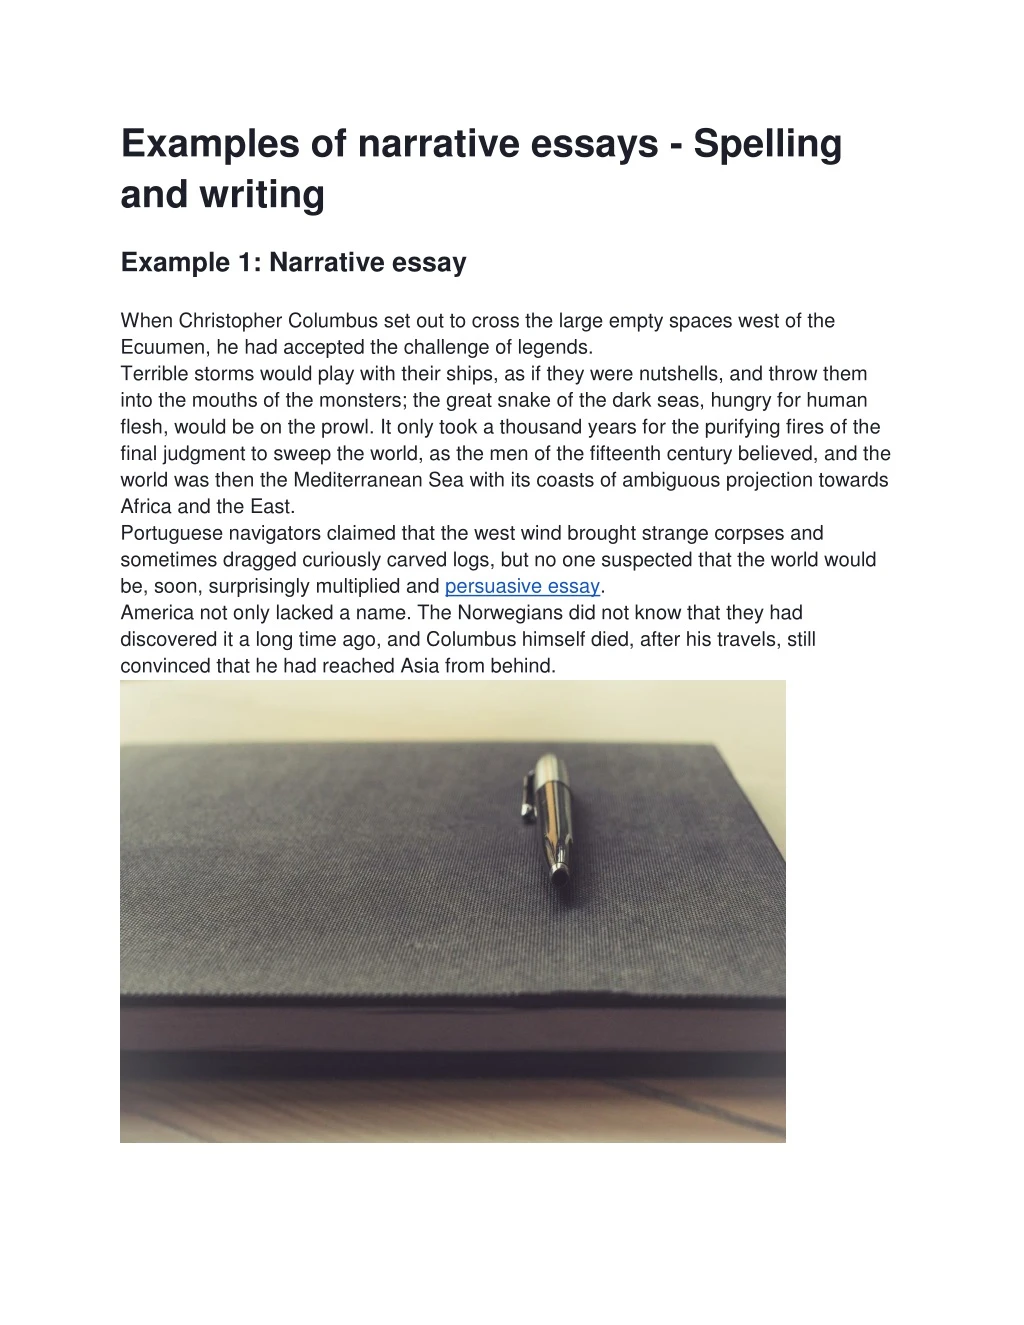 examples of narrative essays spelling and writing